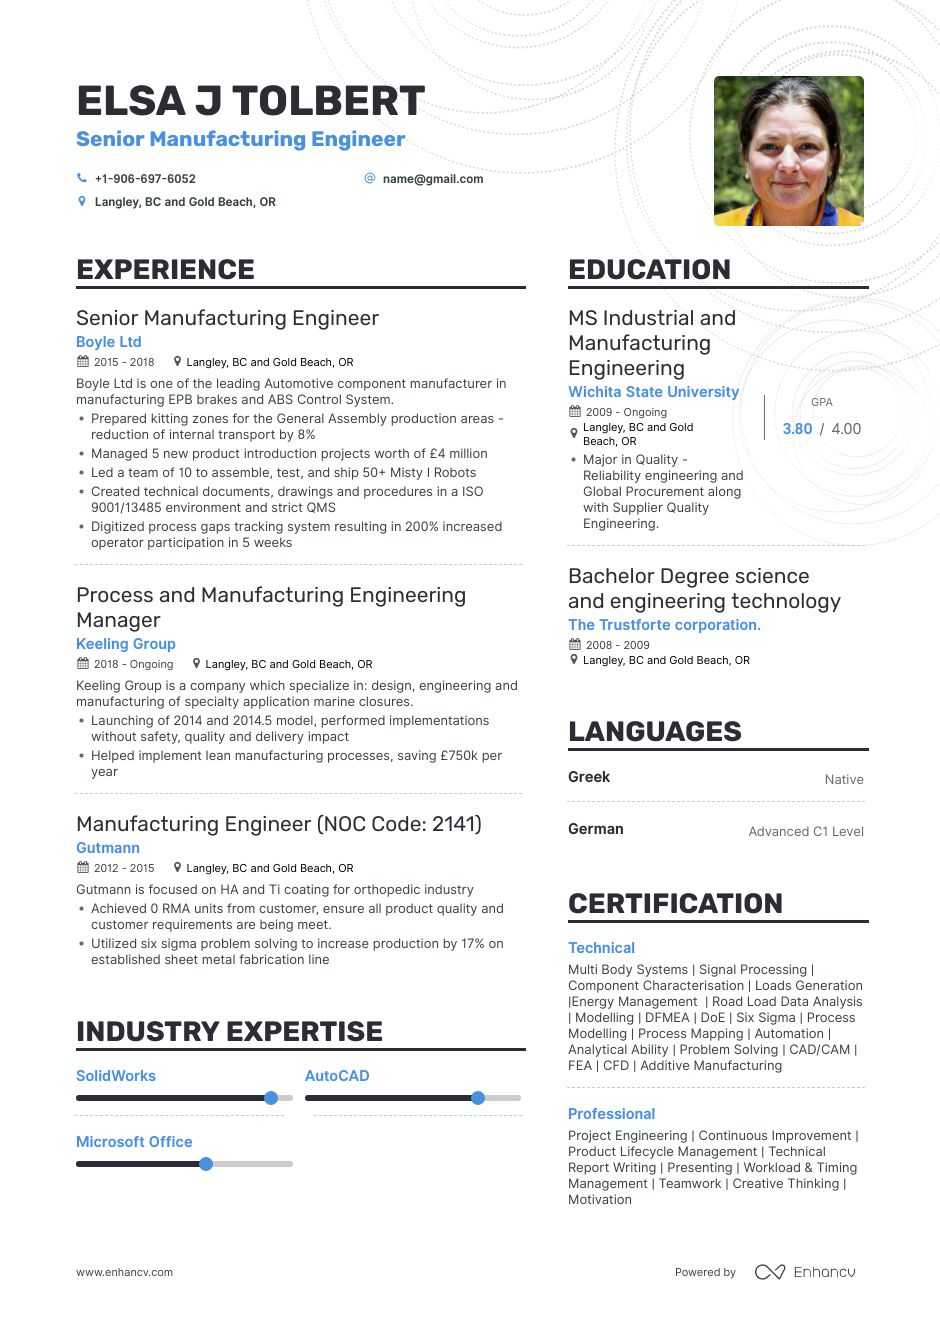 DOWNLOAD: Manufacturing Engineer Resume Example for 2020 ...